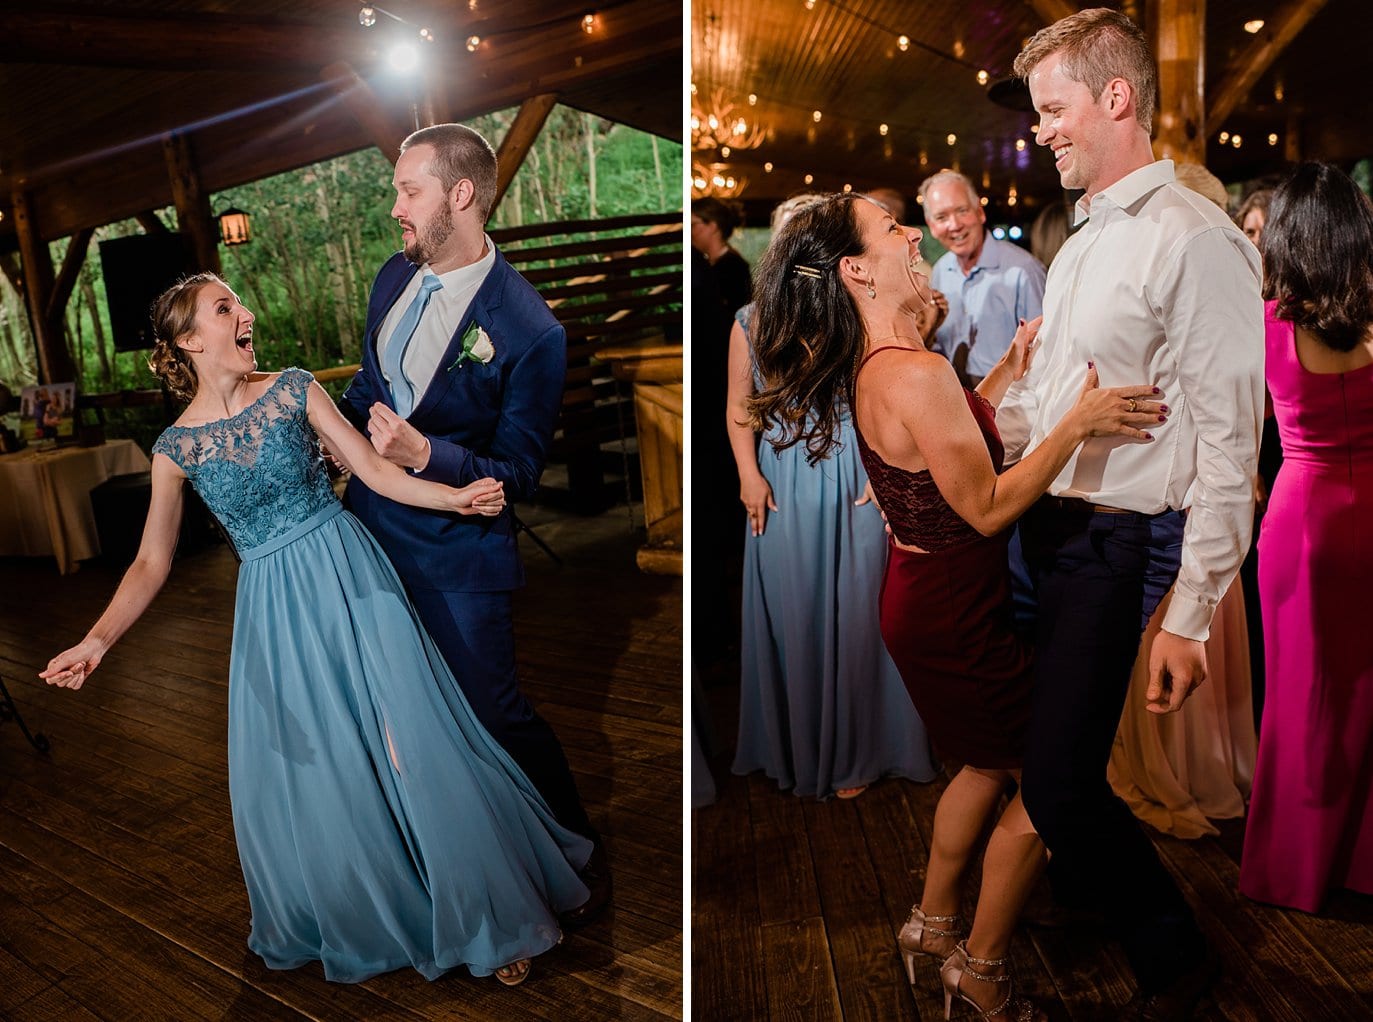 dance party in open air pavilion at Grand Lake Lodge wedding by Granby wedding photographer Jennie Crate Photographer